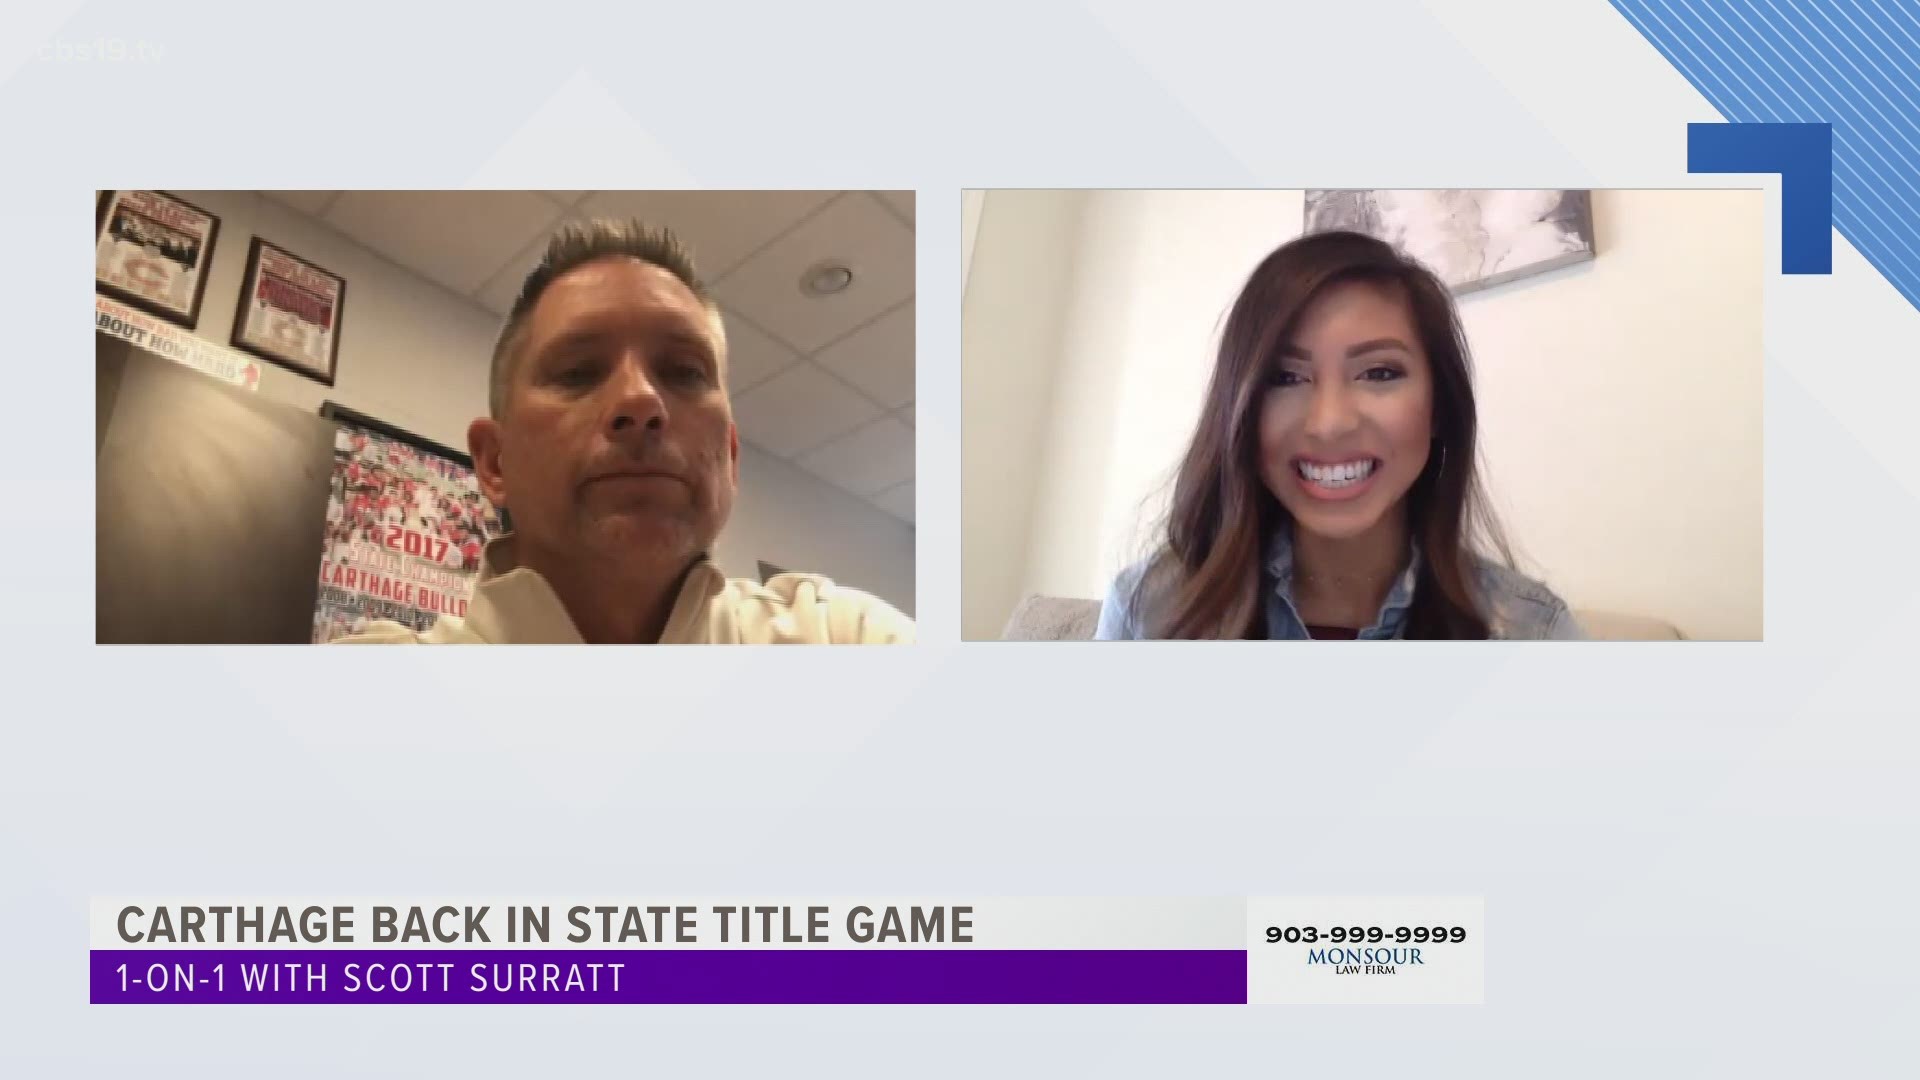 Before Carthage faces Gilmer for the 4A Division II state championship, Scott Surratt joined CBS19 Sports' Tina Nguyen to discuss the East Texas matchup.